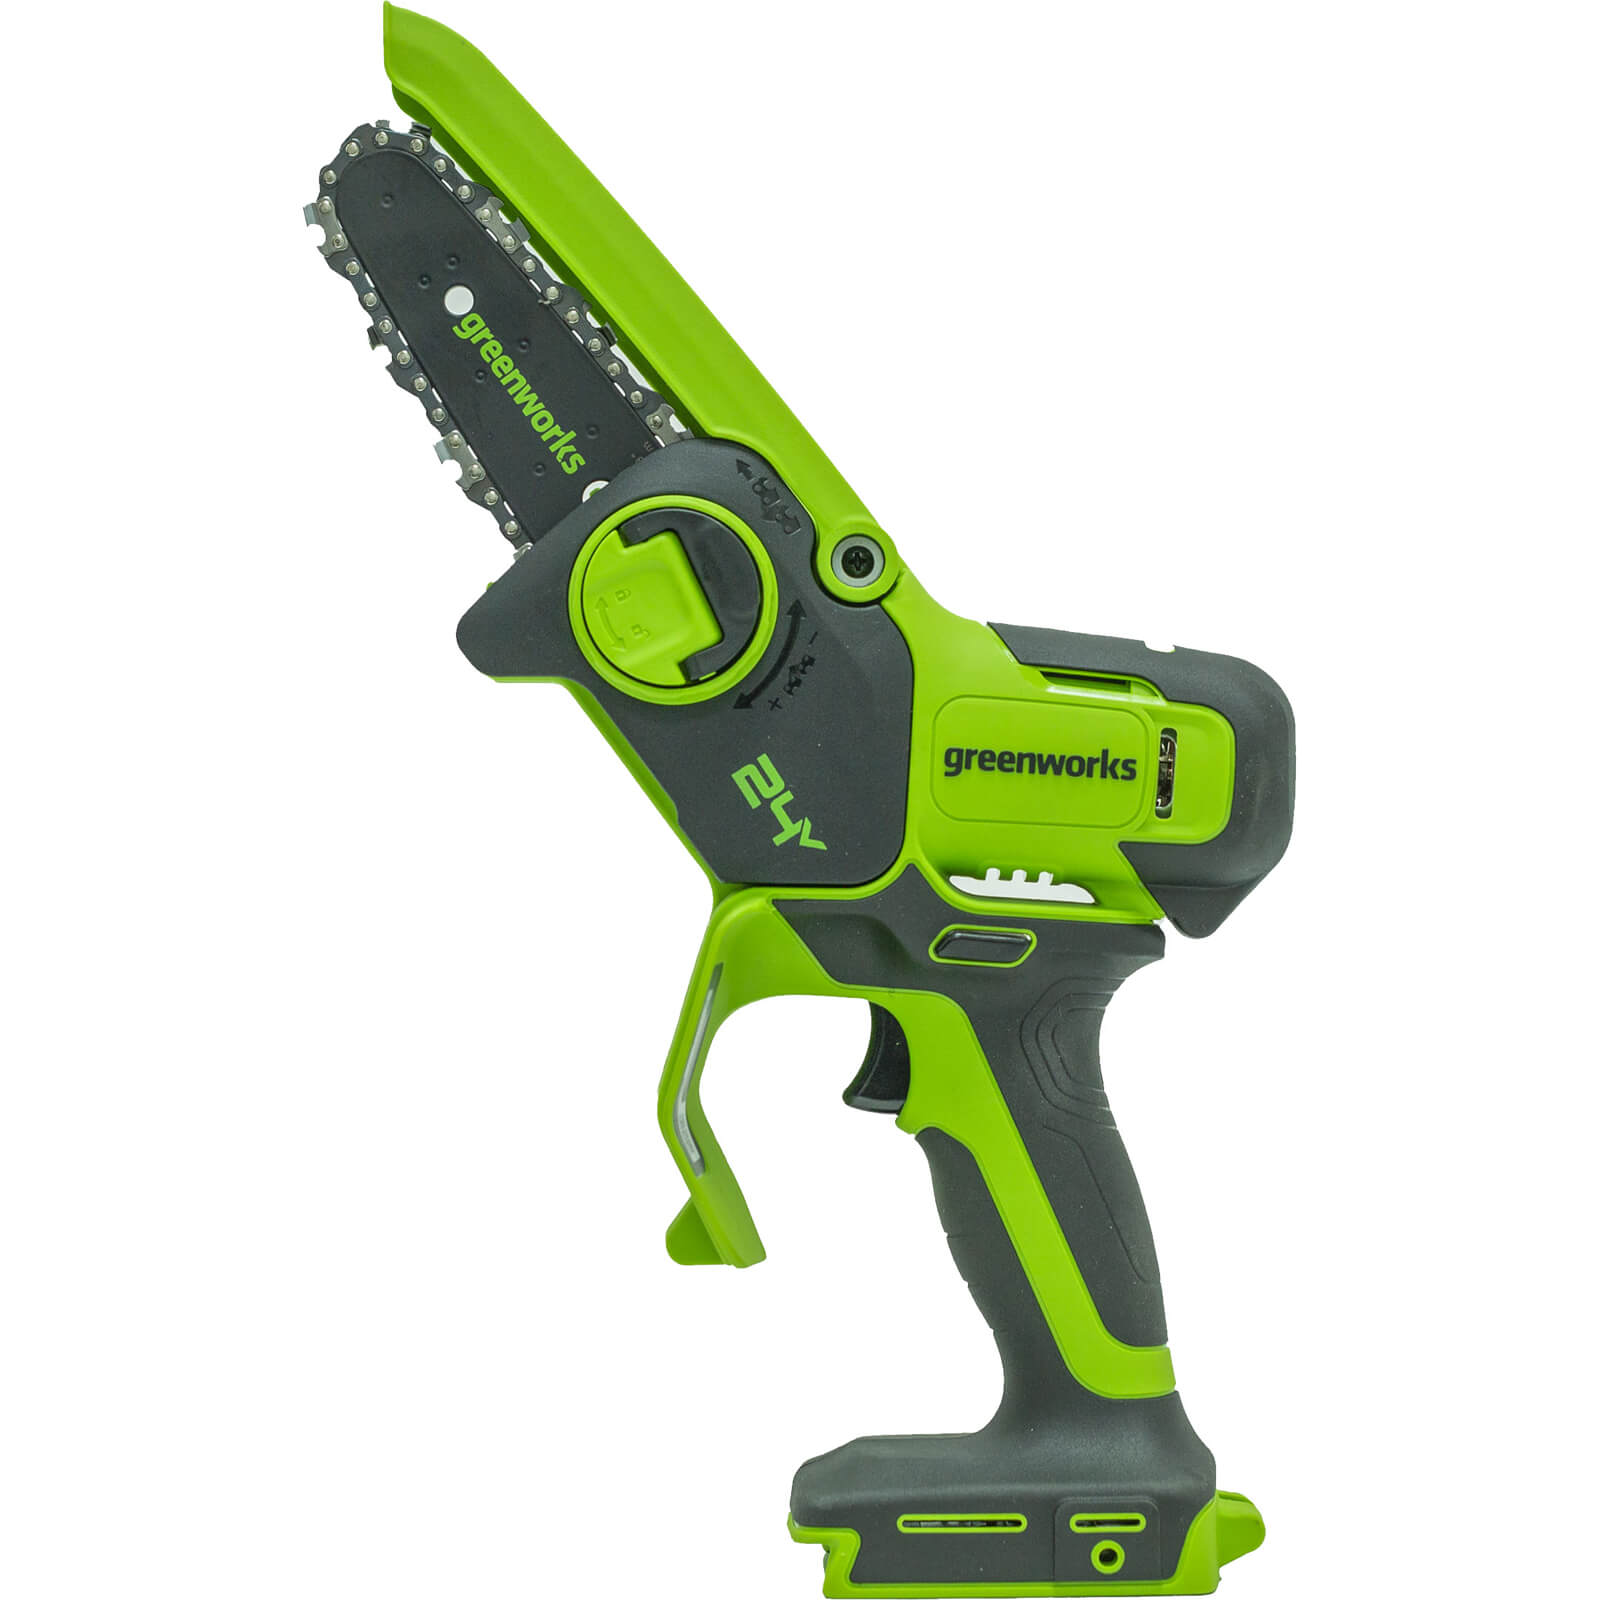 Greenworks G24MCS10 24v Cordless Tree Pruner 100mm No Batteries No Charger FREE Chainsaw Oil Worth £9